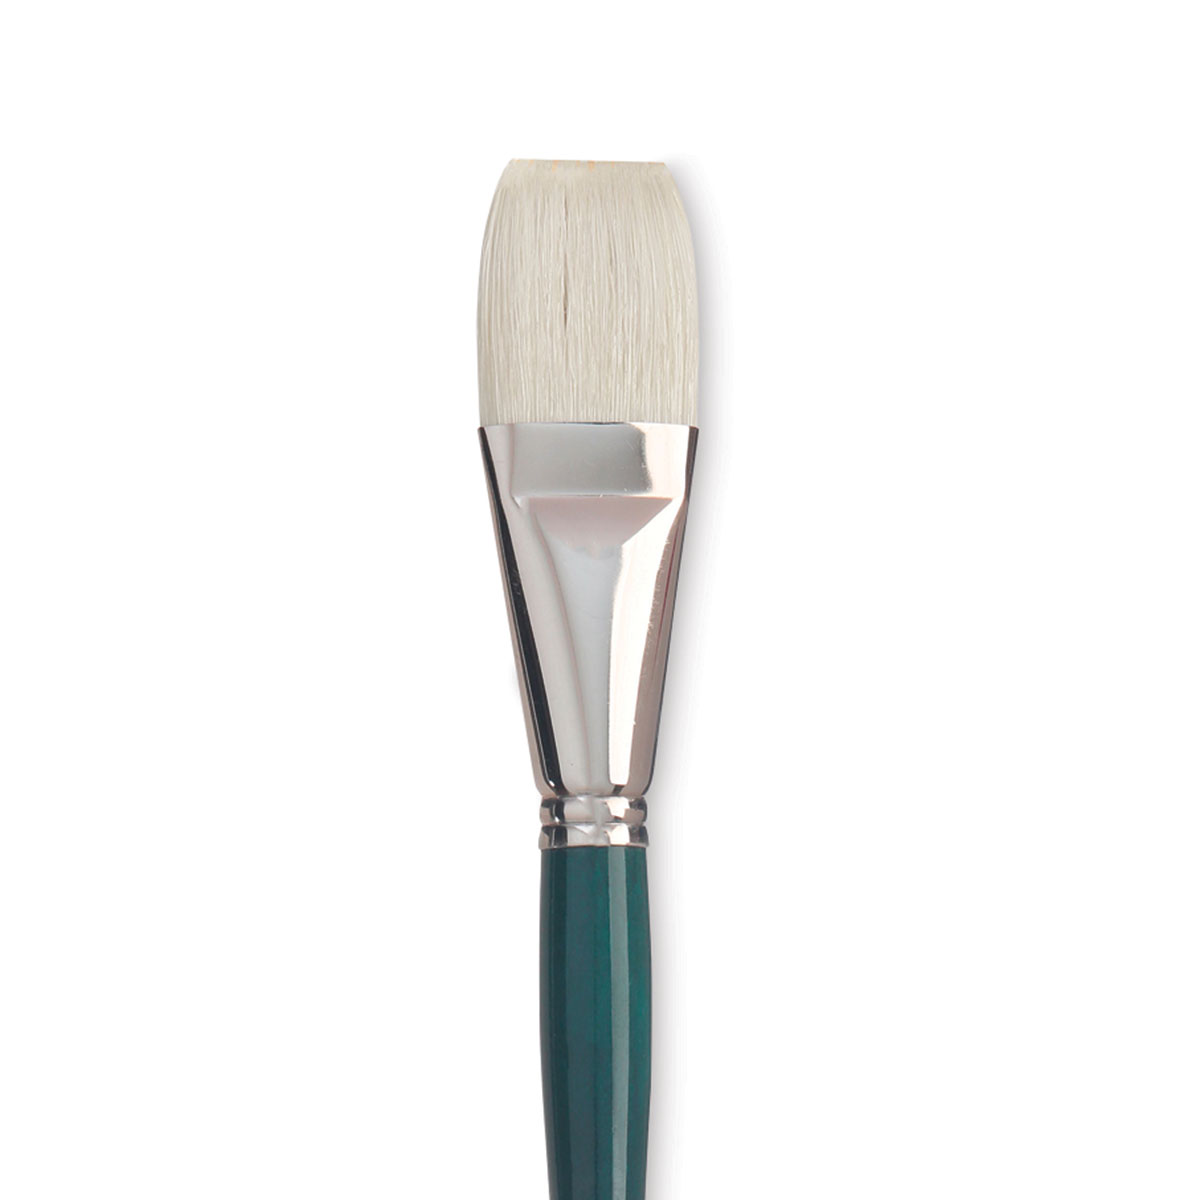 Princeton Series 4350 Ashley Paint Brush 12 Square Wash Bristle Synthetic  Green - Office Depot